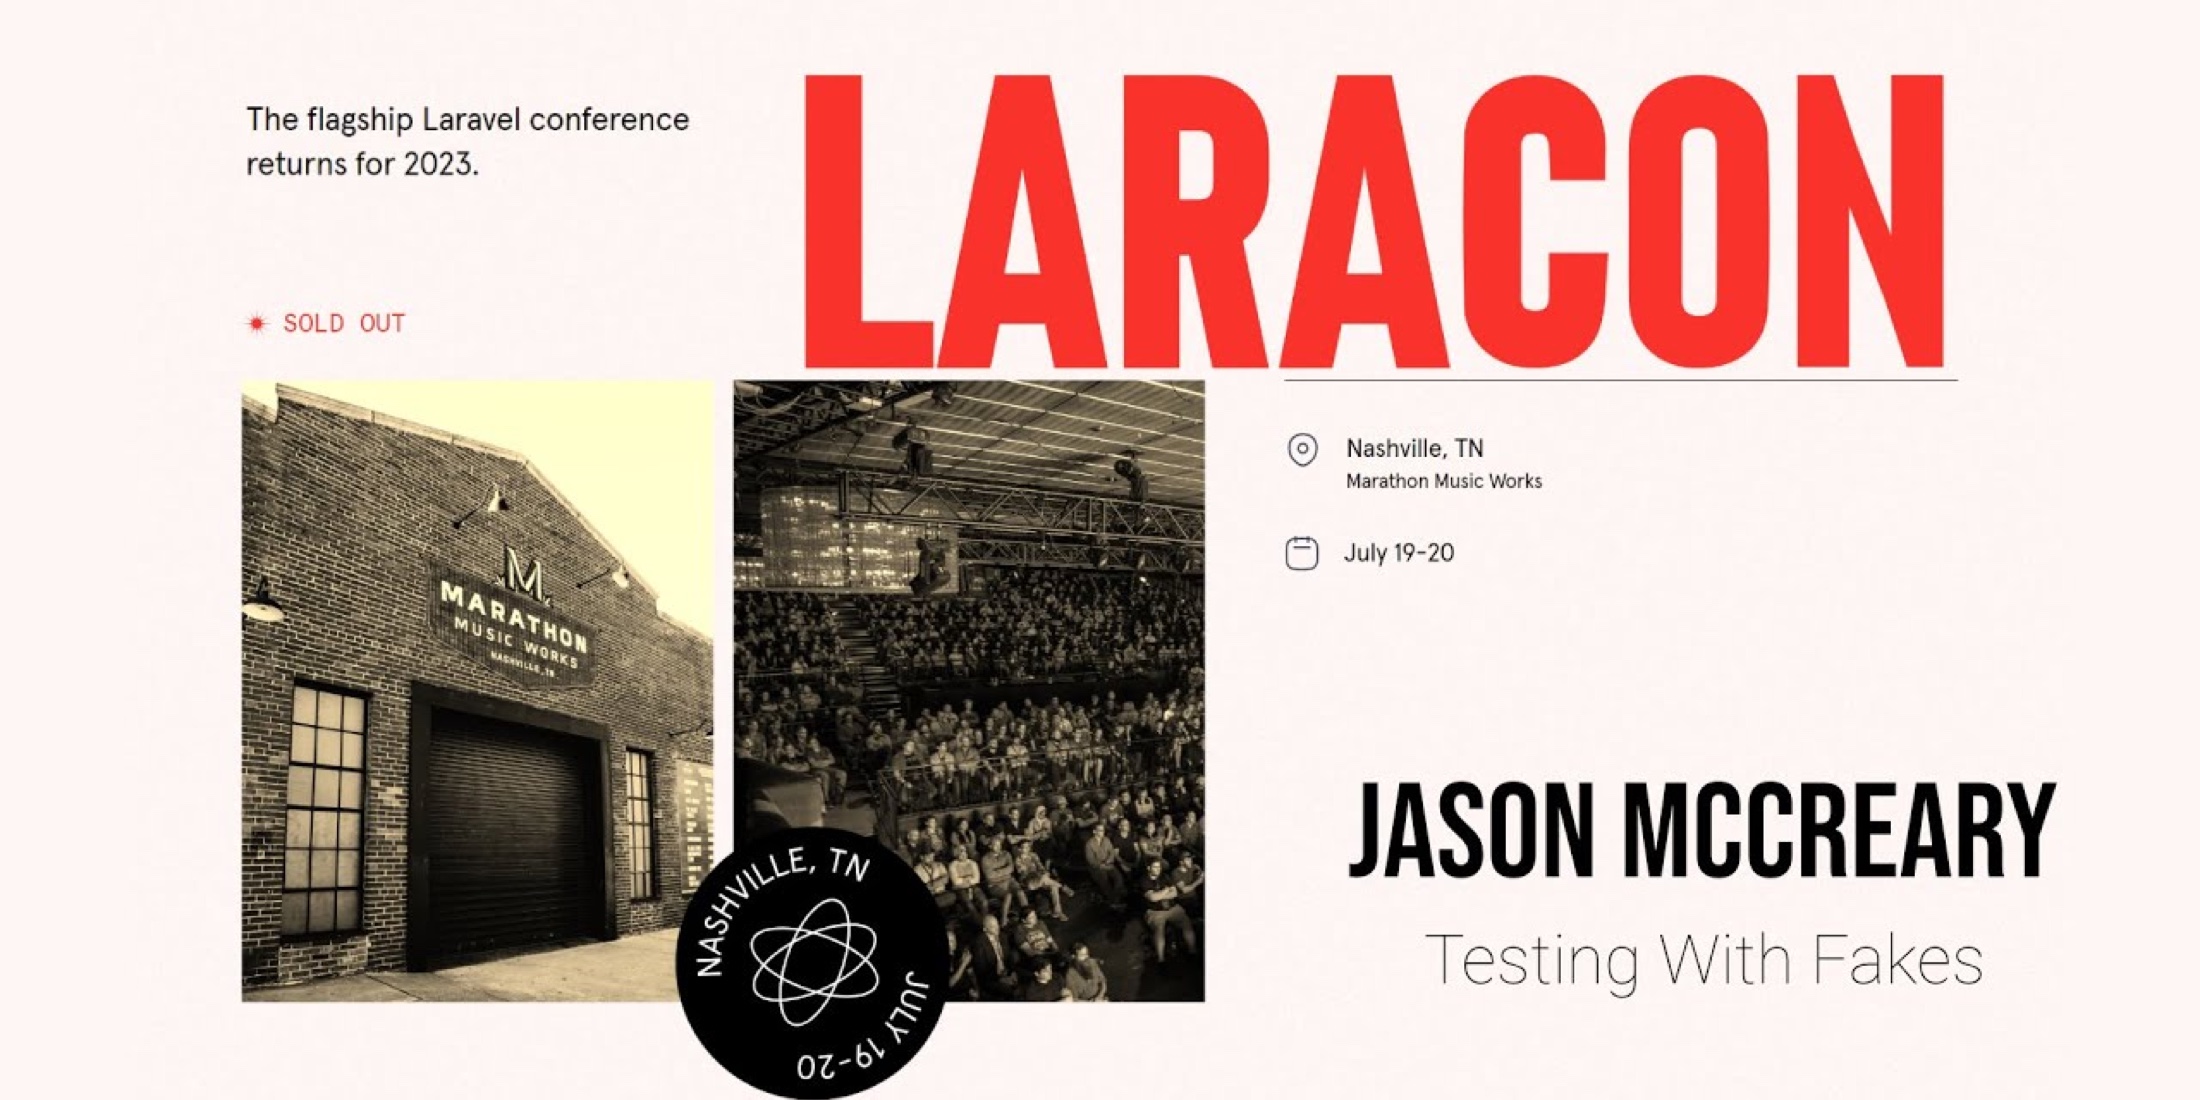 Watch Jason McCreary's "Testing With Fakes" talk from Laracon image